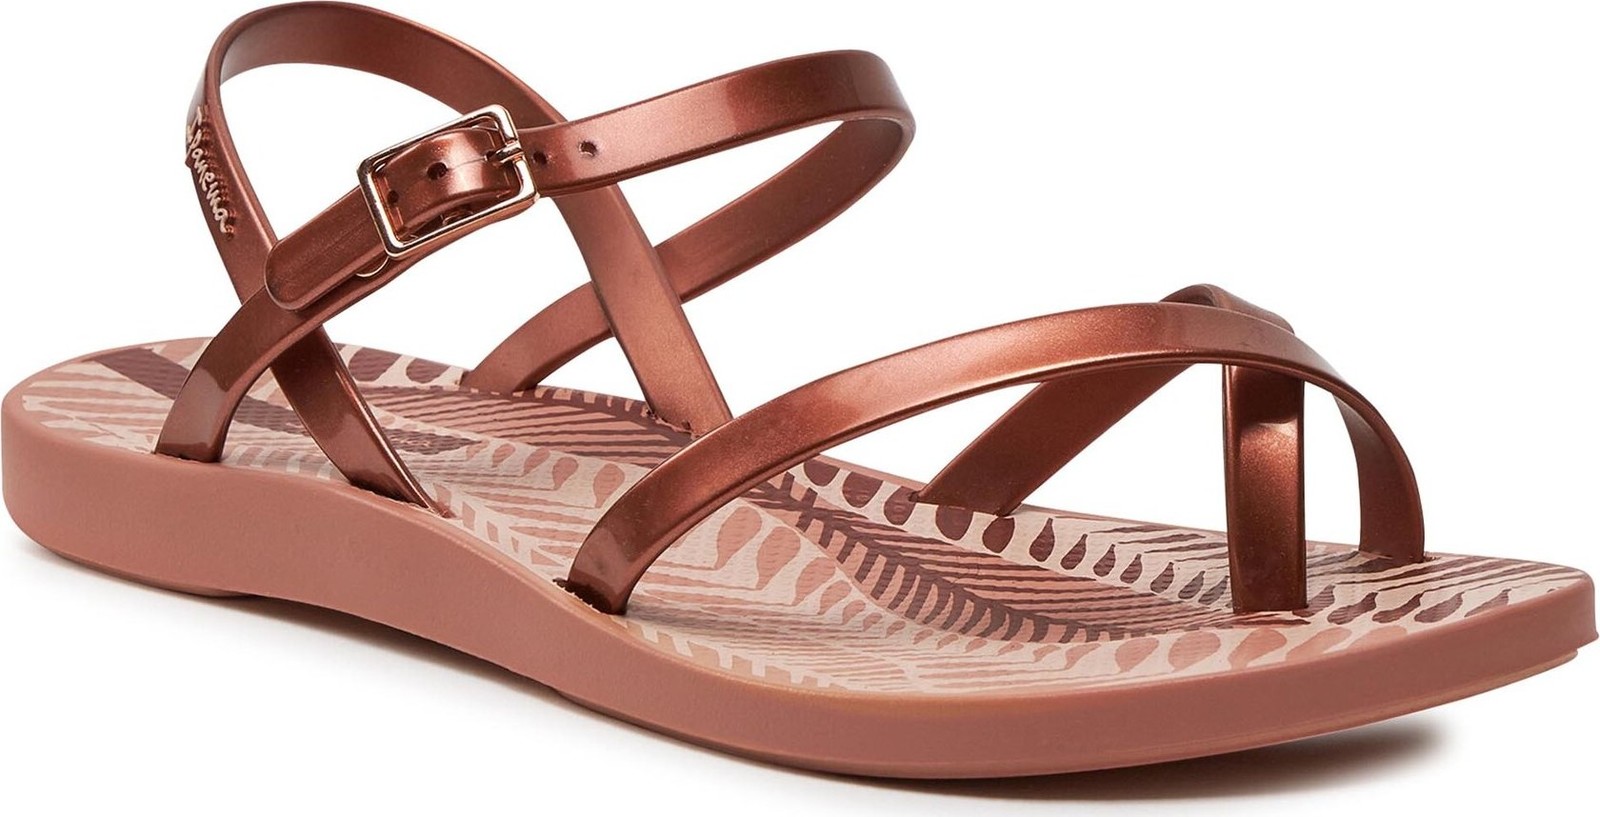 Sandály Ipanema 82842 Pink/Copper/Brown AS576